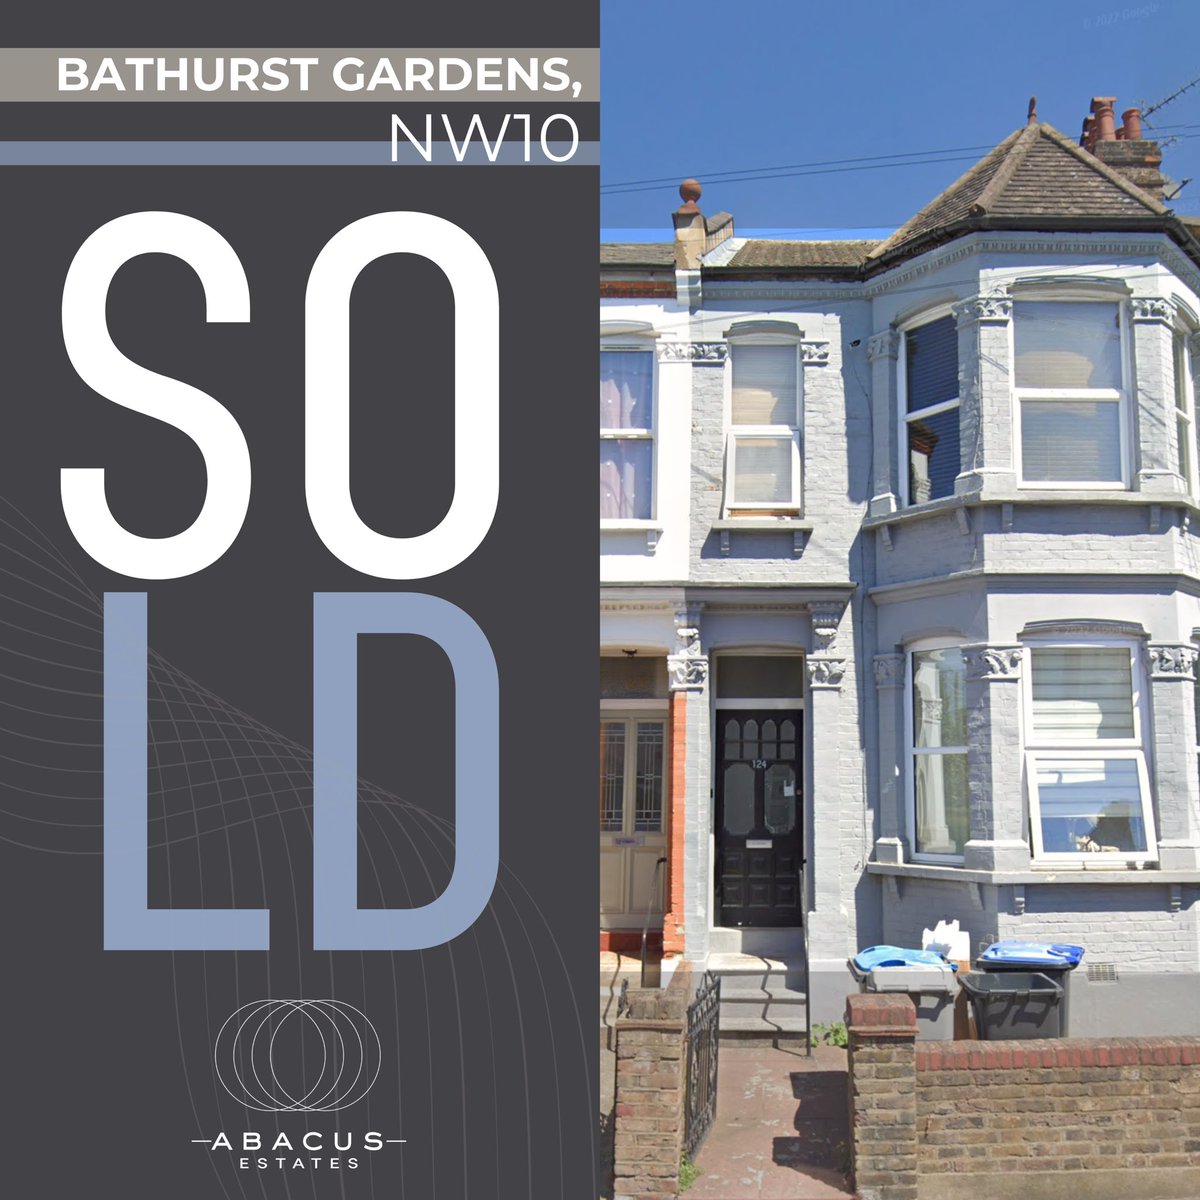 SOLD ☑️

Arranged as two self contained flats with the potential of converting back to a family house. YOUR property could be NEXT… 🏠

📍Bathurst Gardens, NW10 - SOLD

#sold #properties #realestatelife